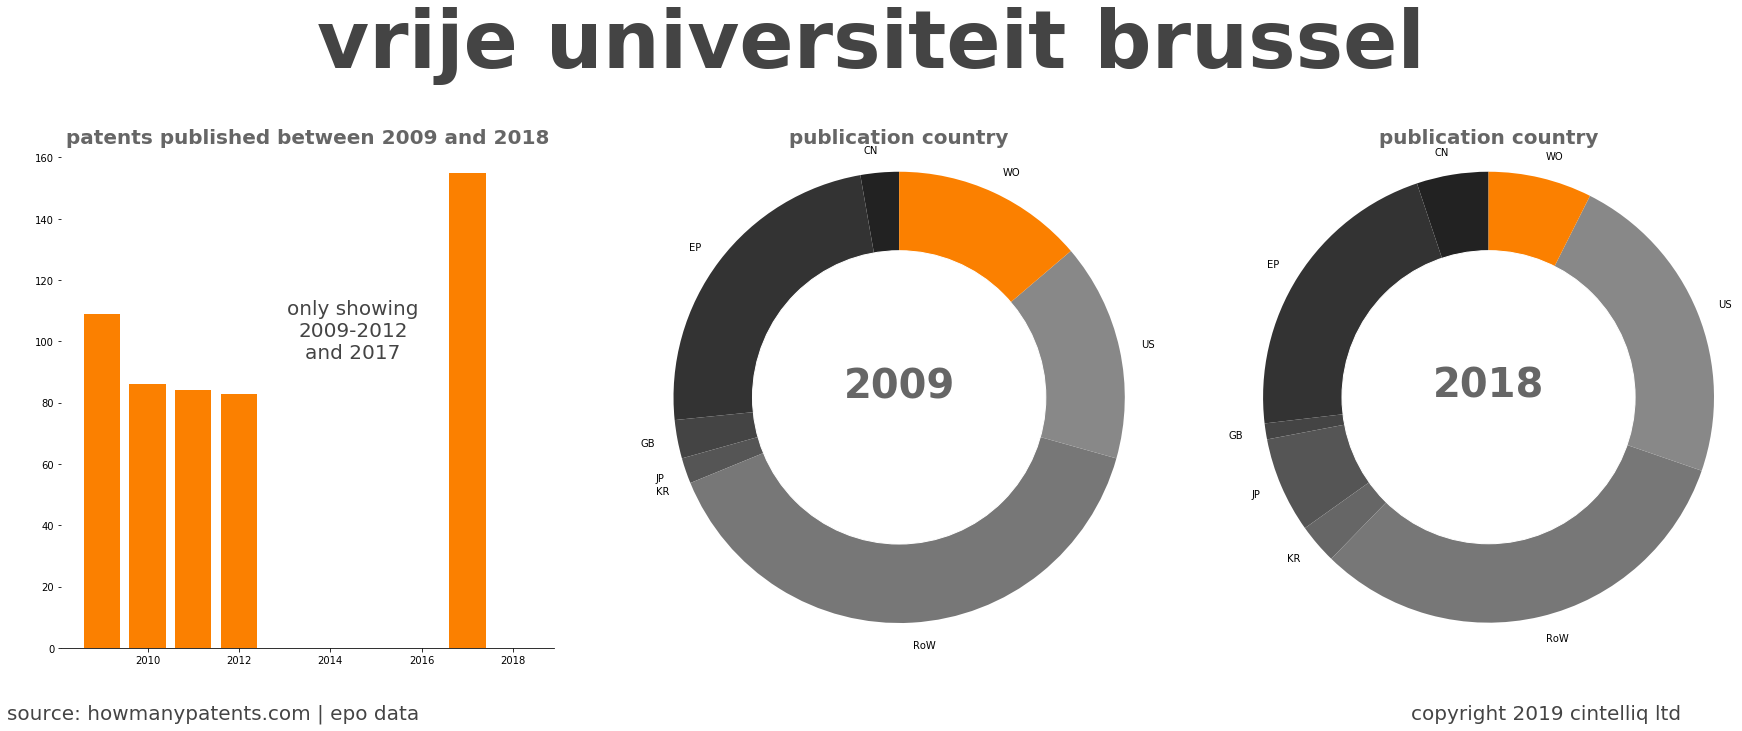 summary of patents for Vrije Universiteit Brussel